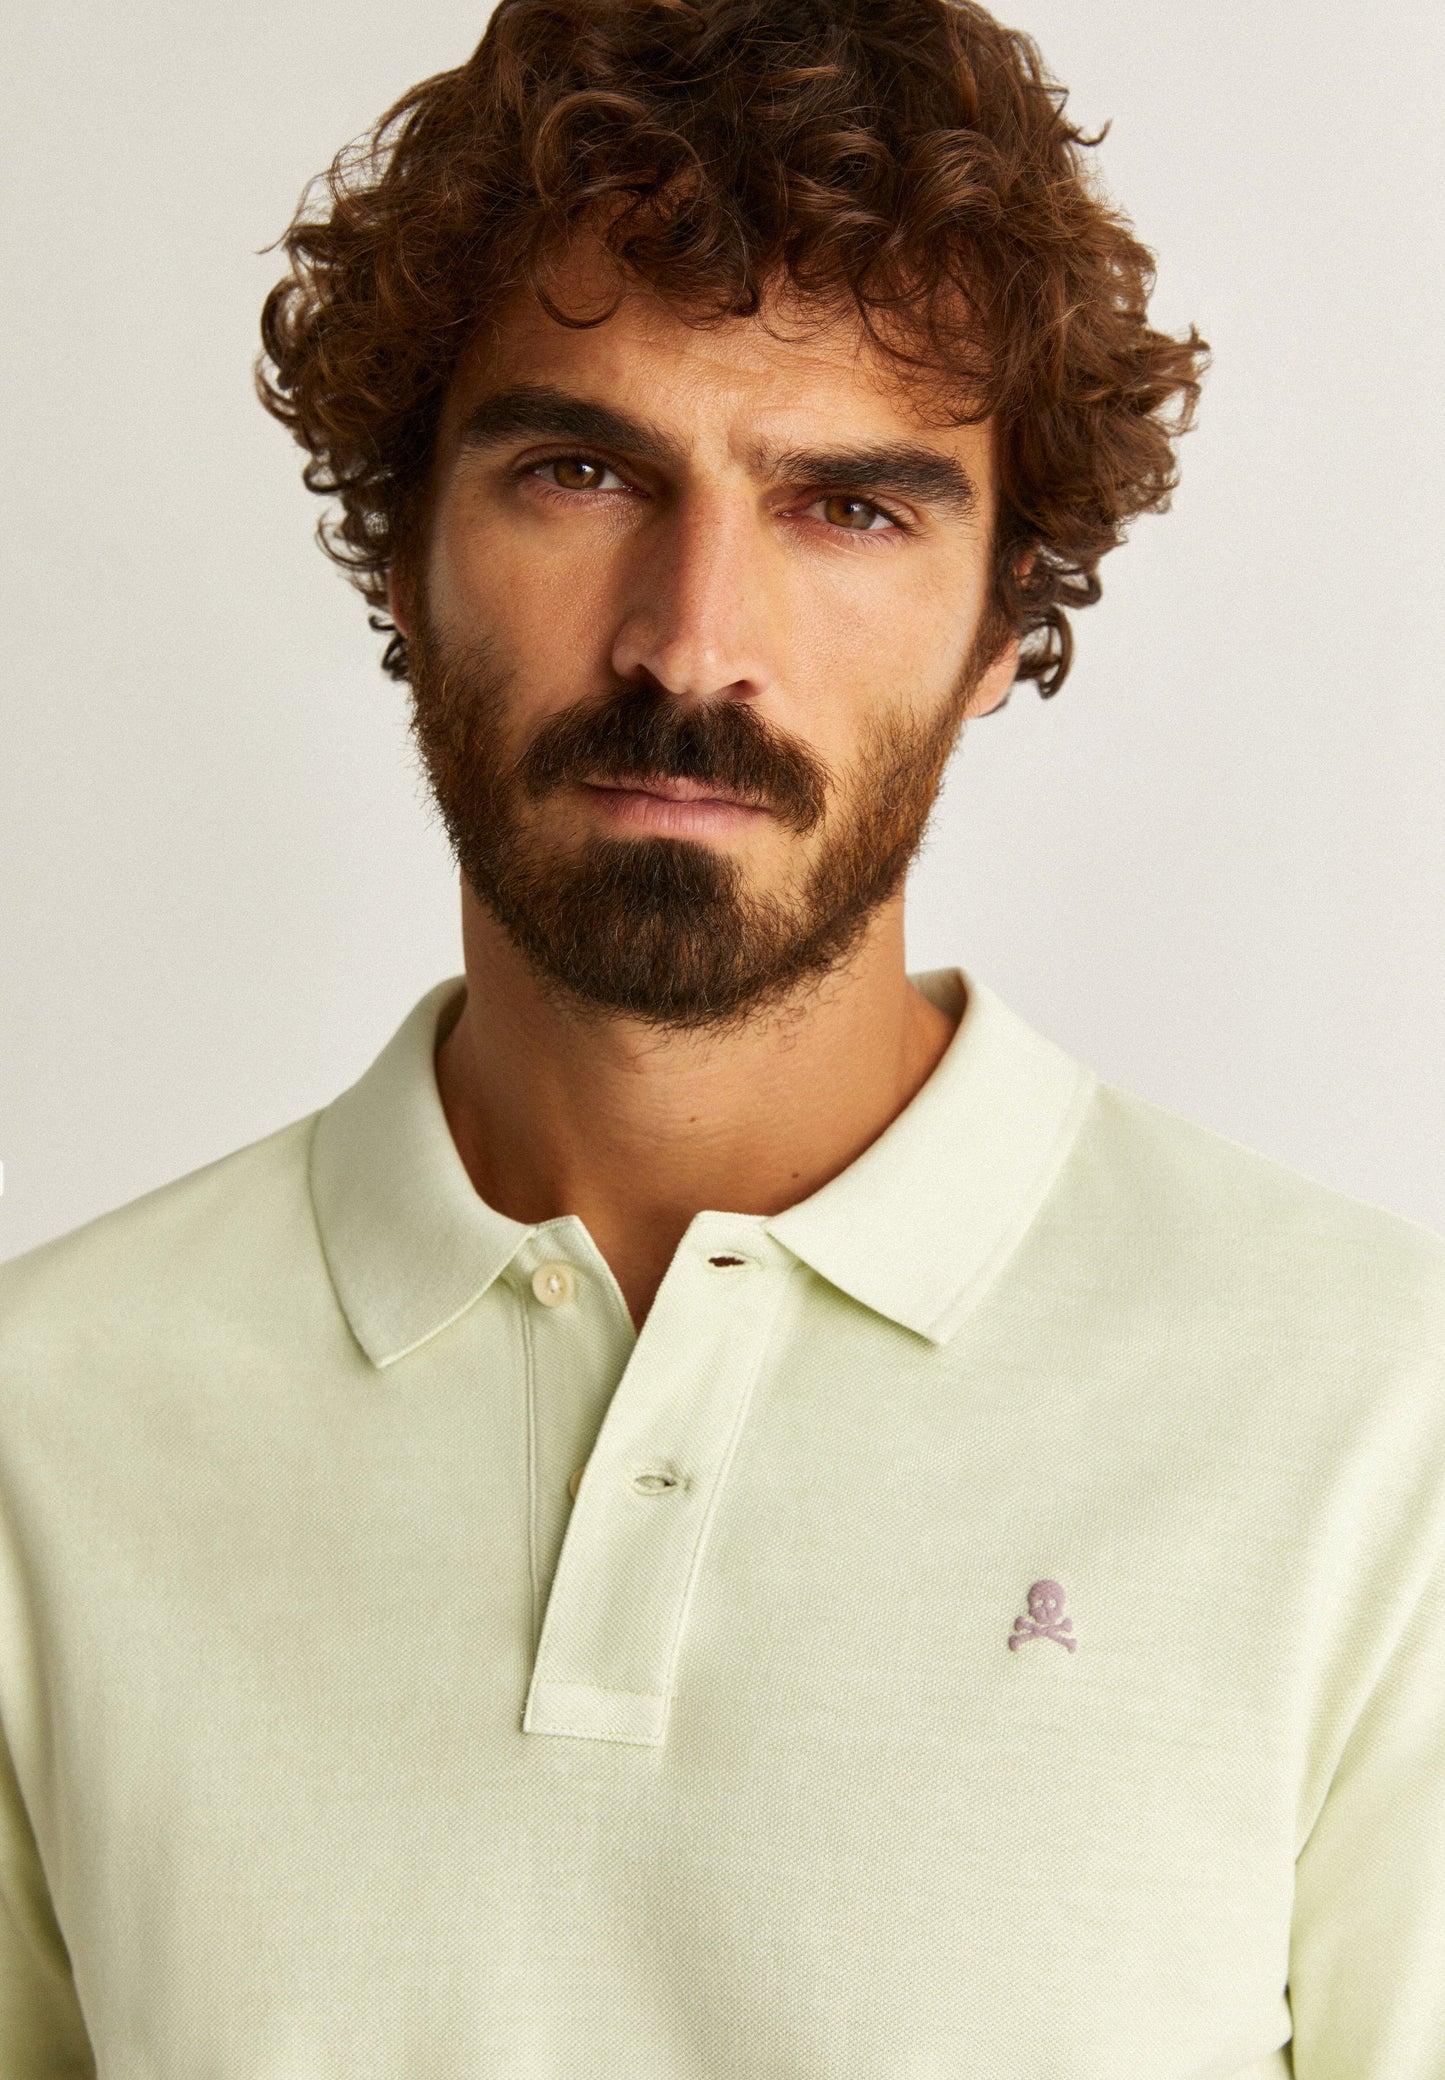 POLO SHIRT WITH CONTRAST SKULL